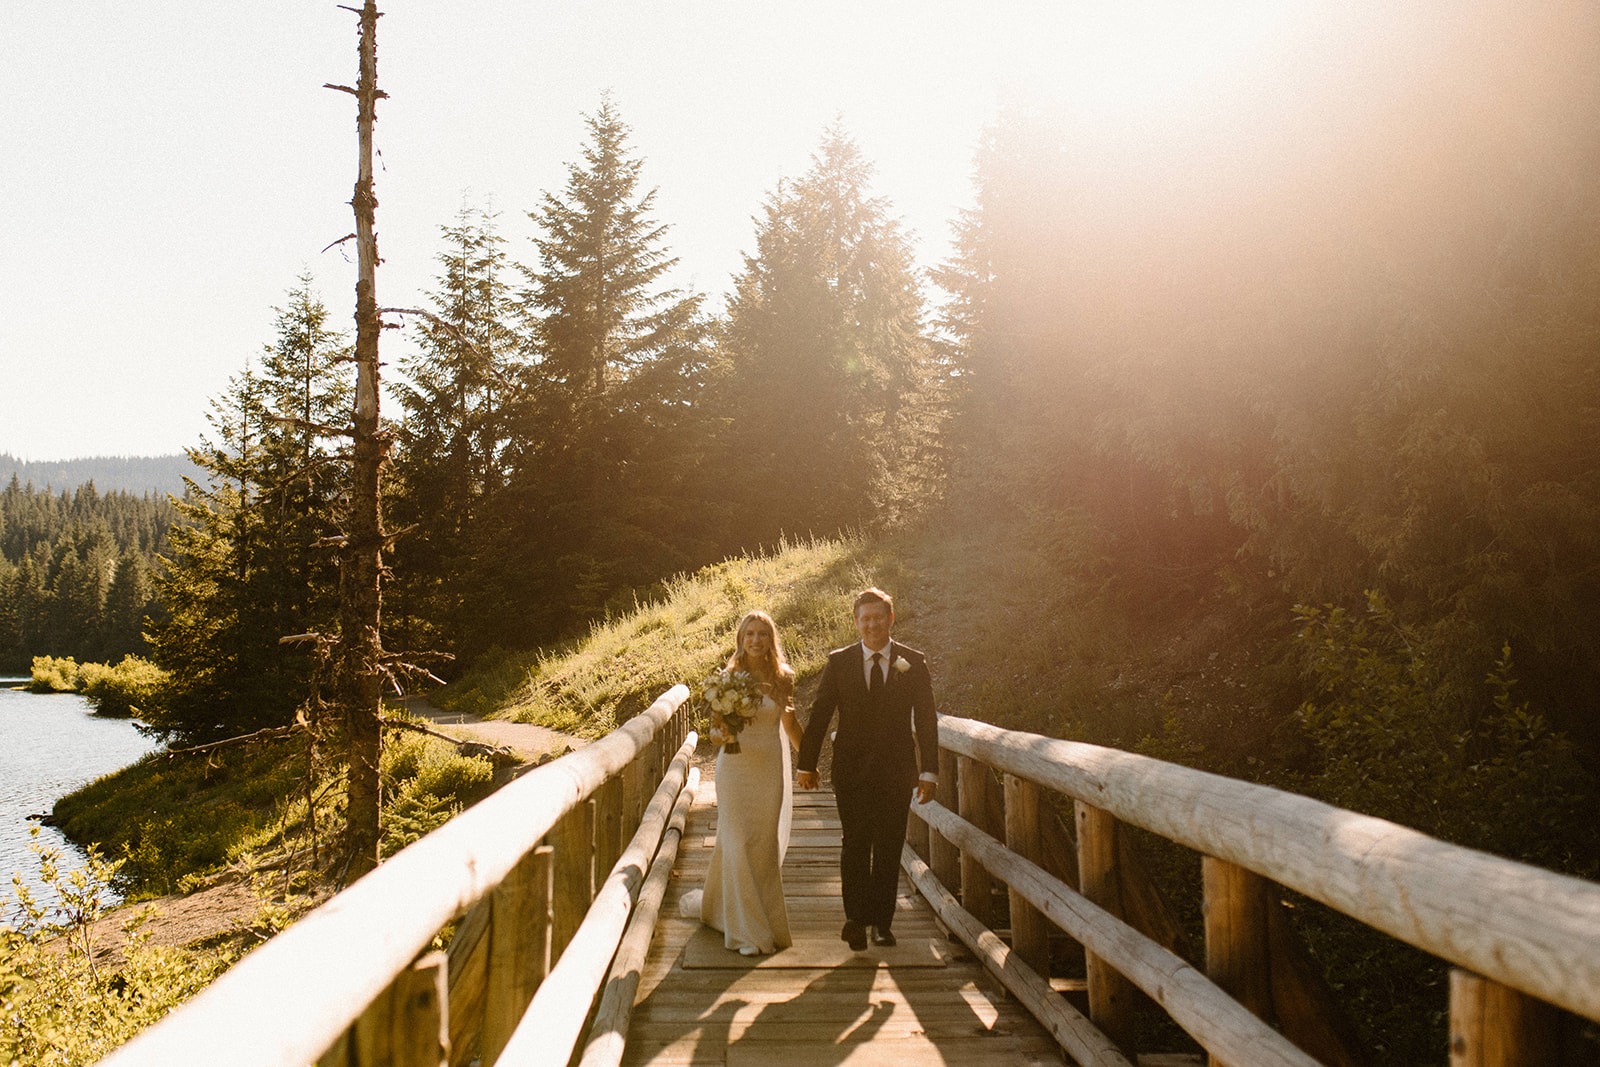 Bride and groom photos with beautiful backdrops for a Gold Creek Pond Elopement